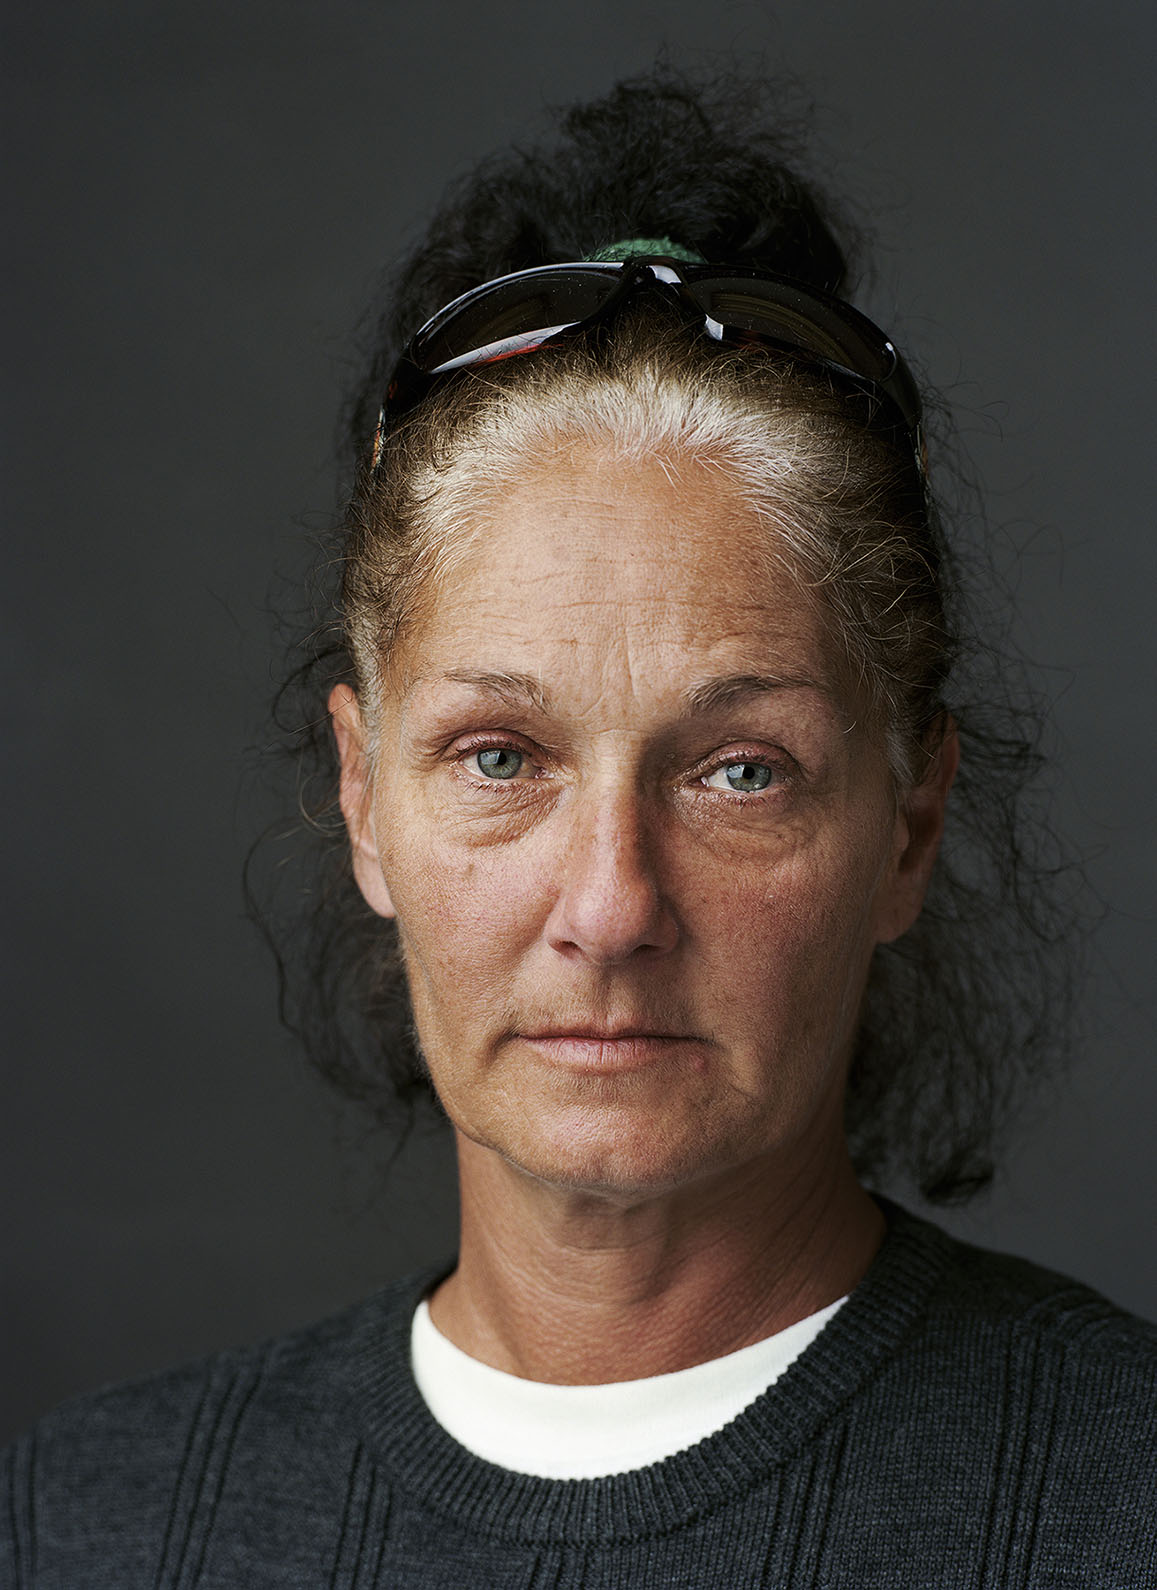 USA. "Down and Out in the South": Studio portraits of homeless people in Atlanta (GA), Columbia (SC) and the Mississippi Delta.  Tami (b. Hollywood, FL, 1959), photographed in Columbia, SC, September-October 2010.